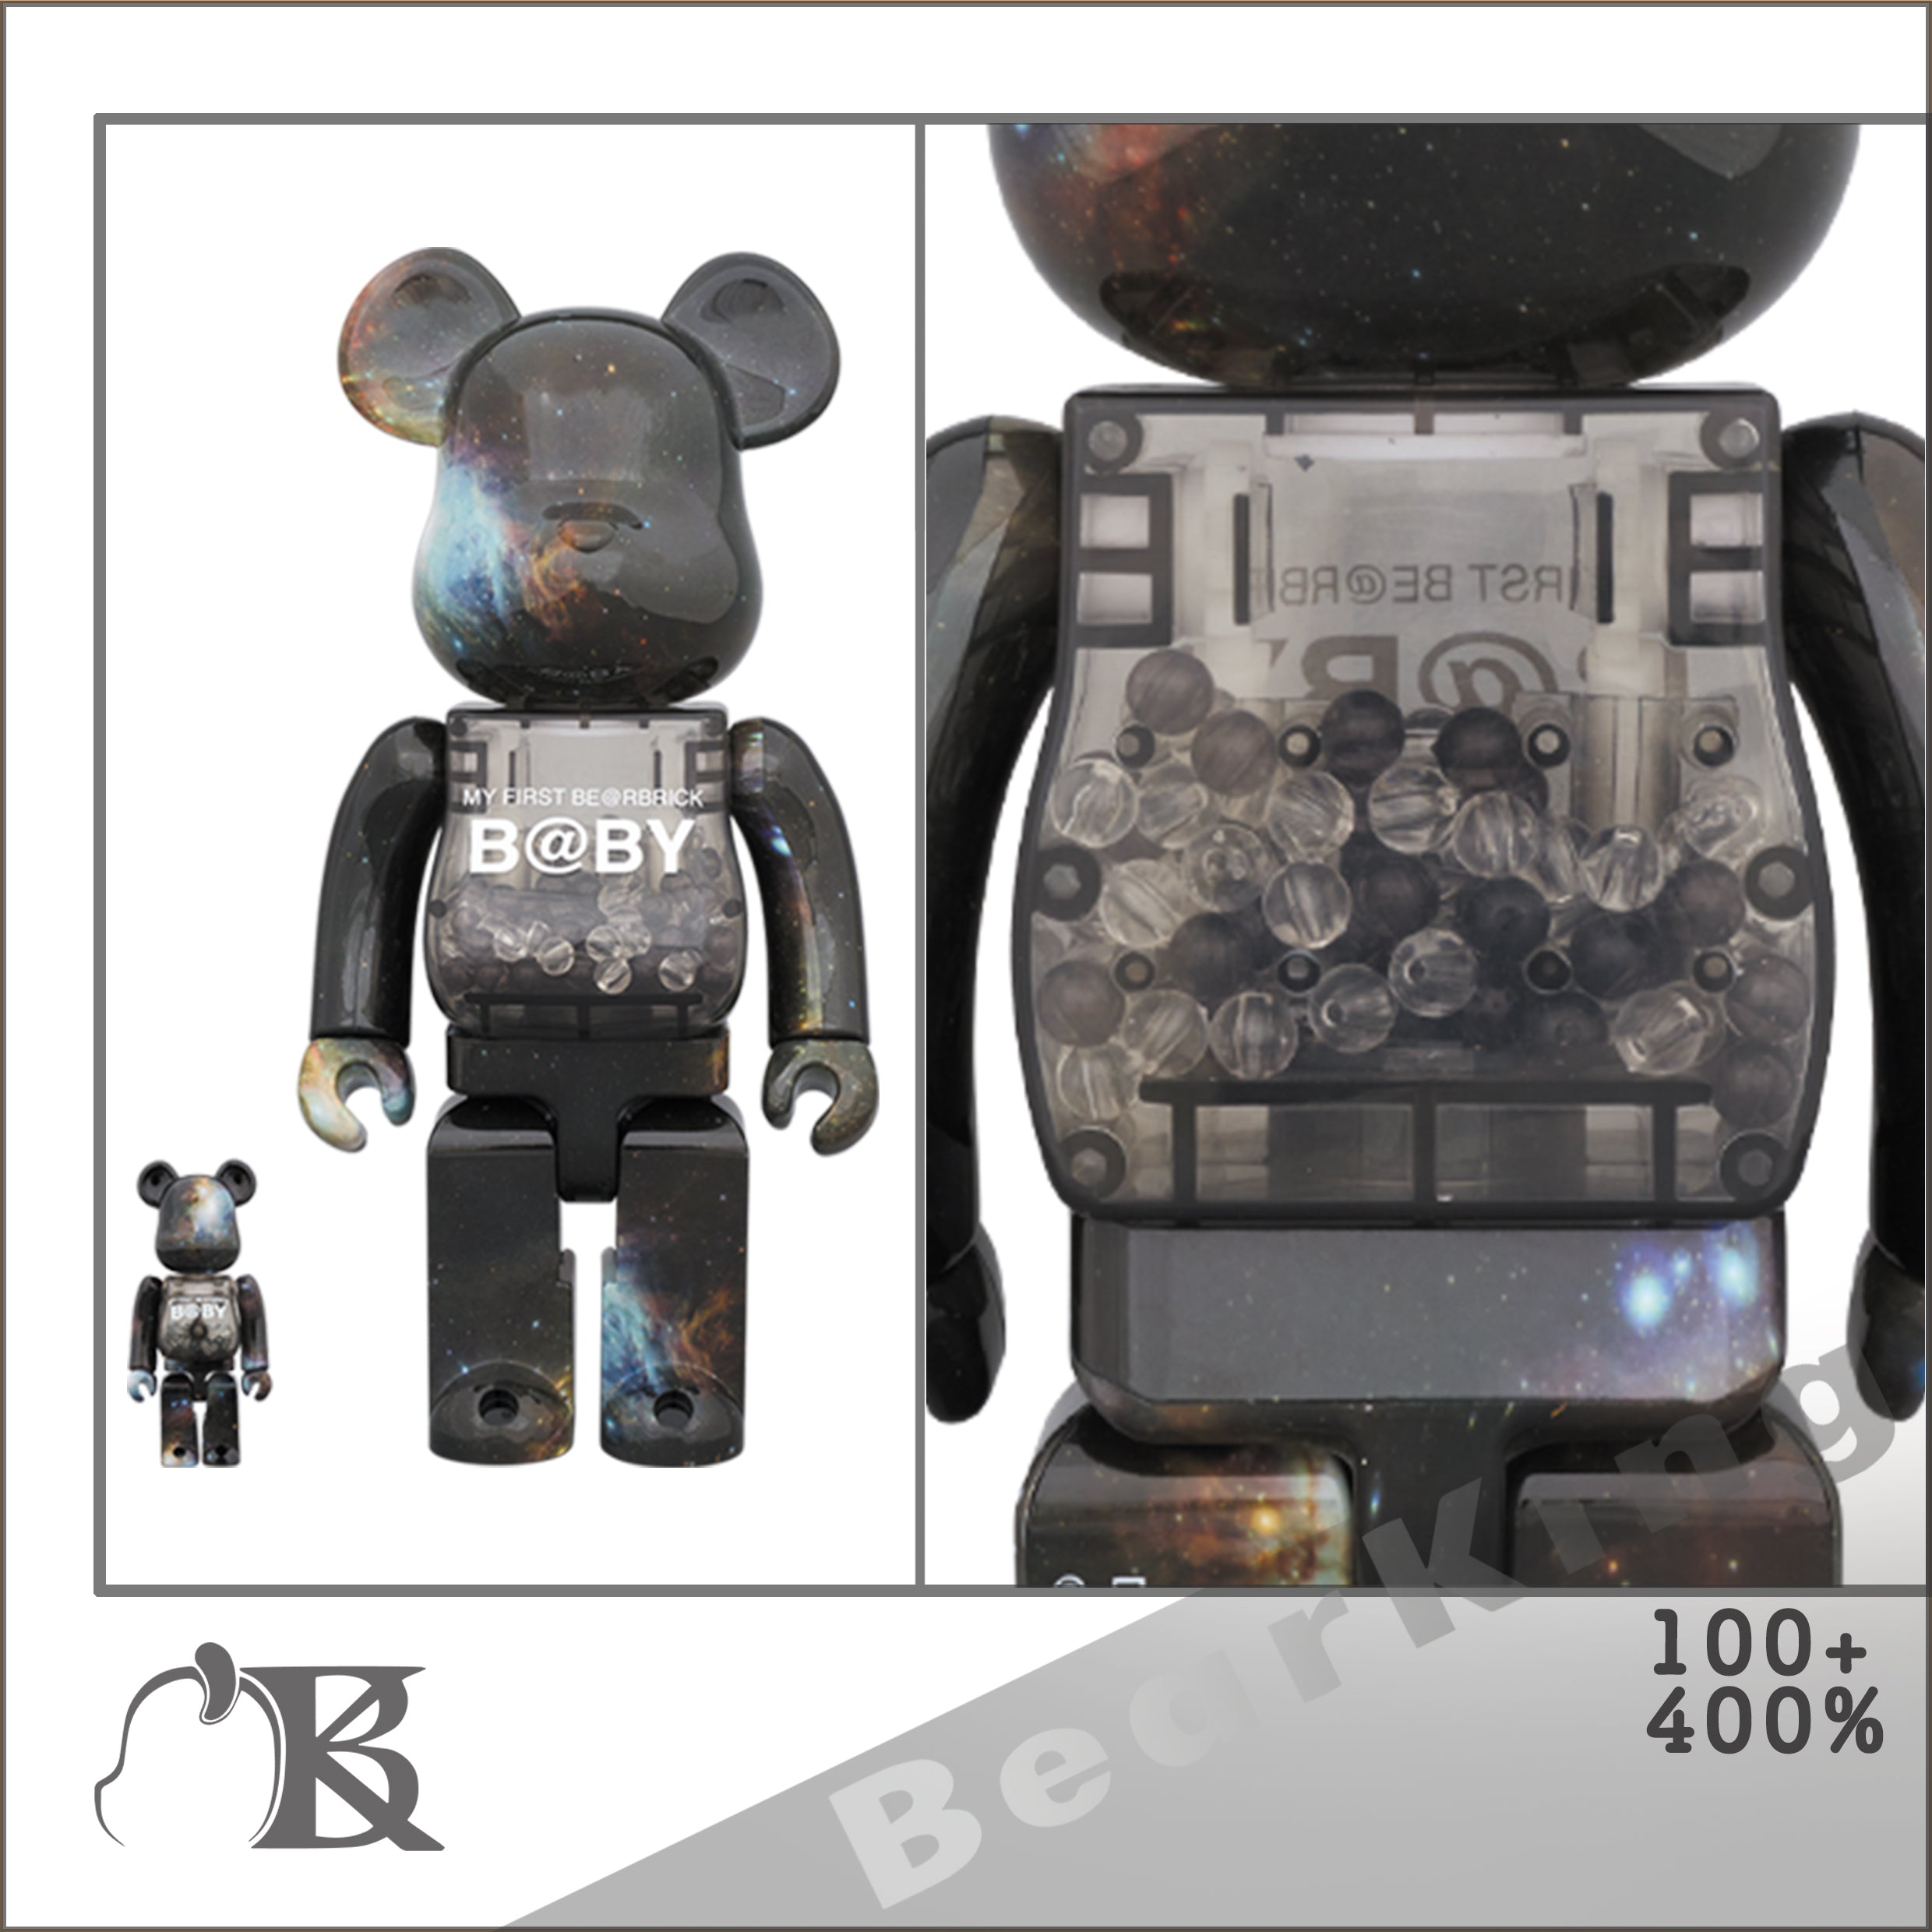 MY FIRST BE@RBRICK B@BY SPACE Ver.100％+400% 千秋 Baby 星空